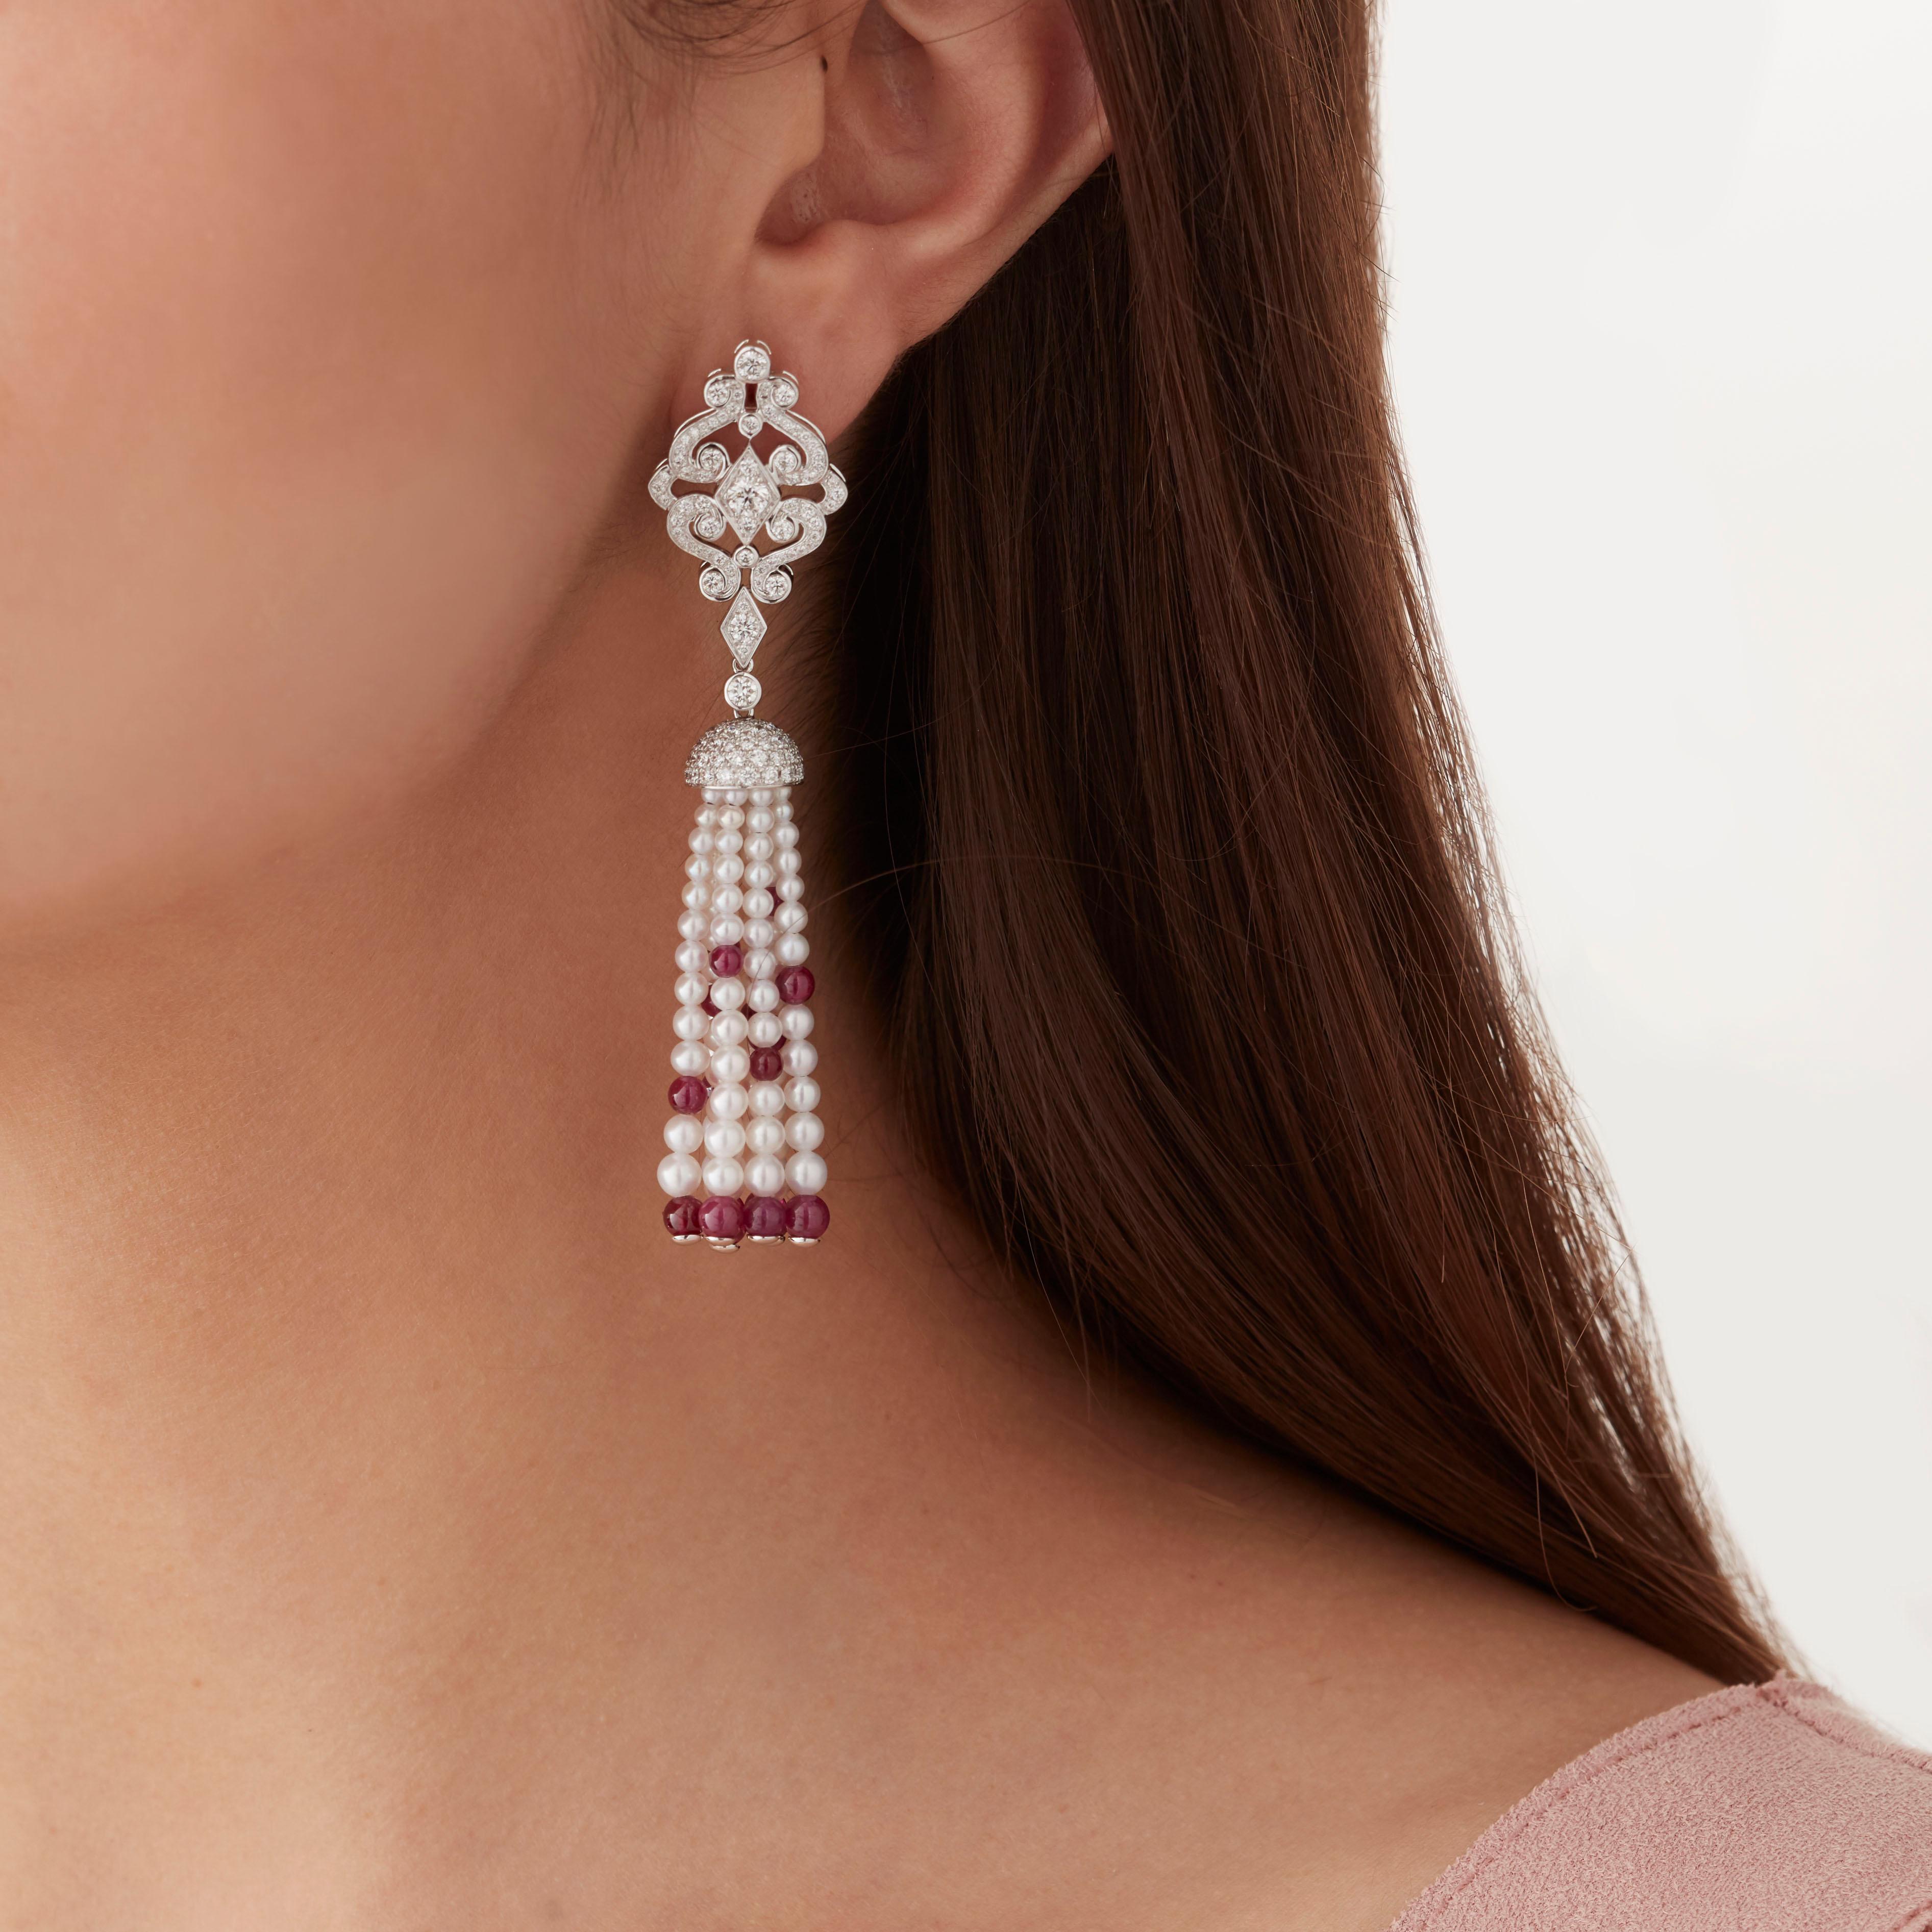 A House of Garrard pair of 18 karat white gold earrings from the Albemarle collection set with round white diamonds, polished ruby beads and white pearls.

268 round white diamonds weighing 3.35cts
Total diamond weight: 3.35cts                      